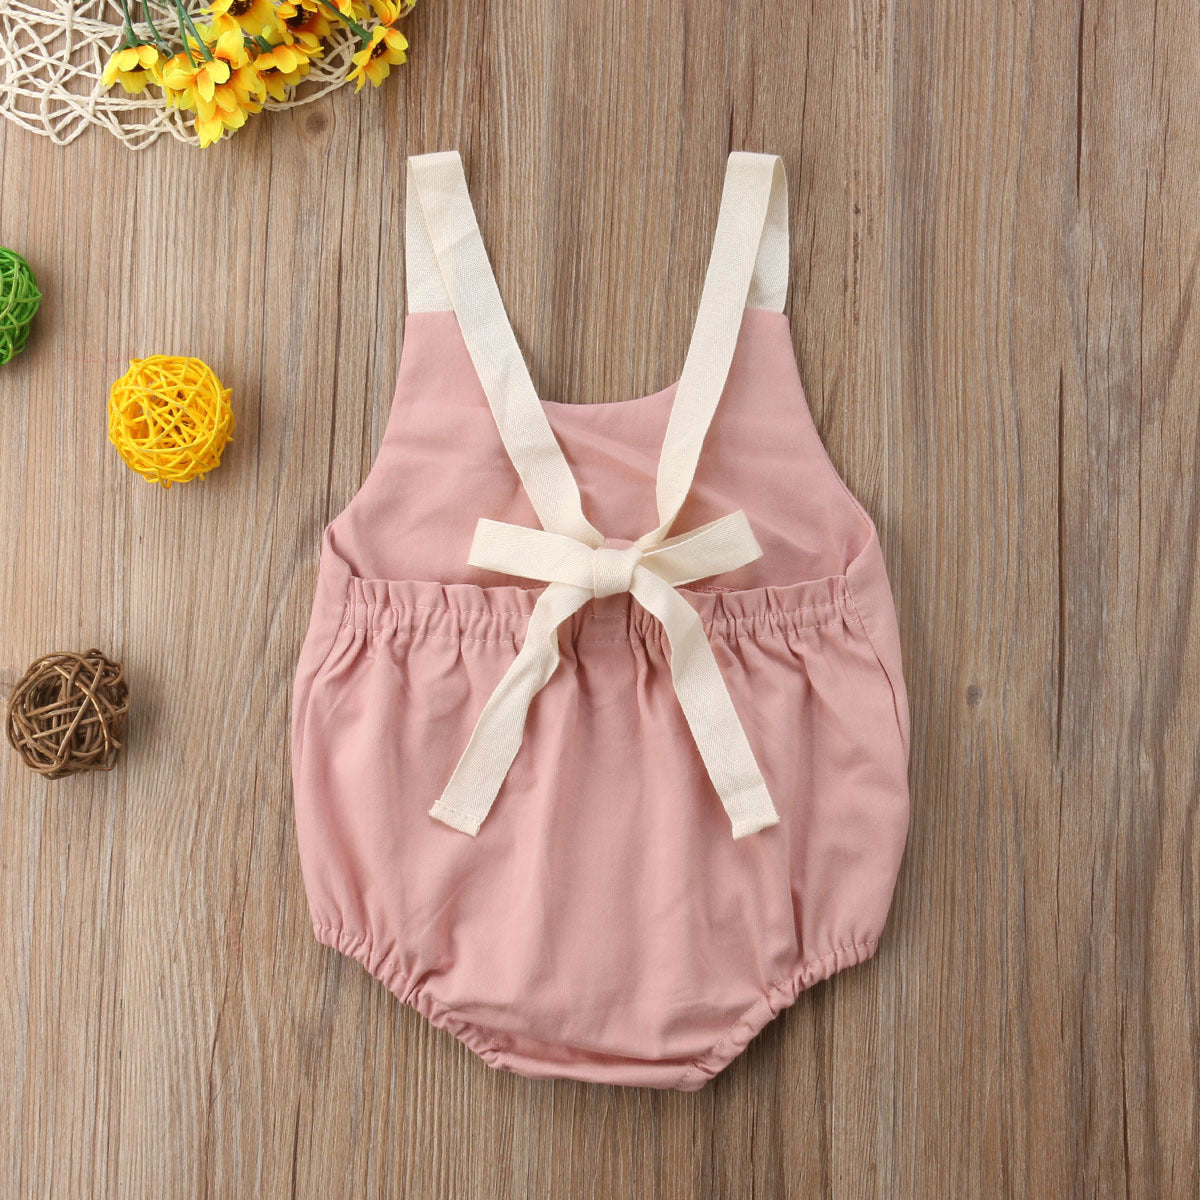 Baby Girl Summer Bowknot Backless Romper Outfit 0-24 Months